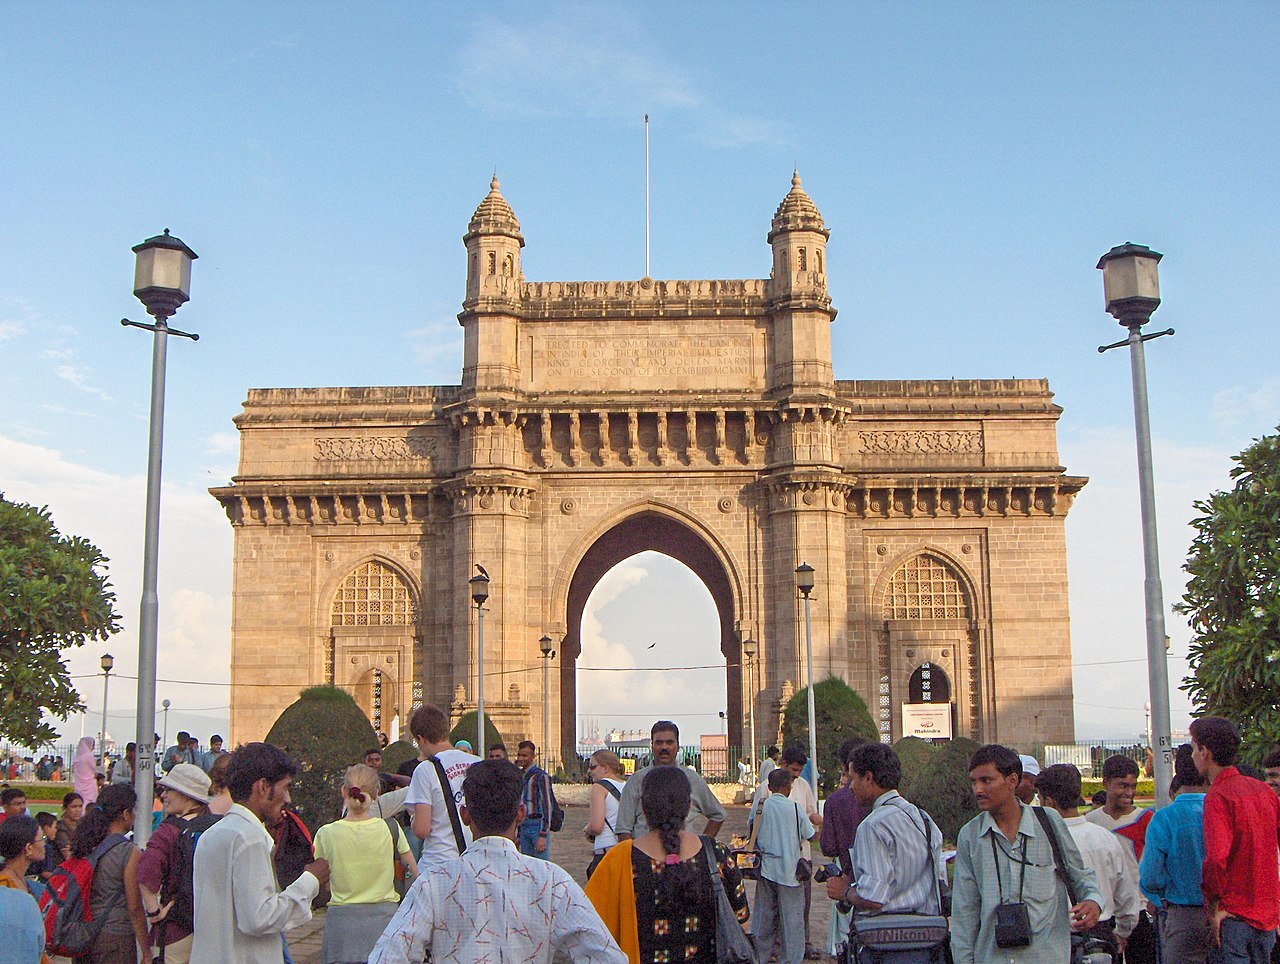 Destinations throughhout India, not just the Gateway of India, are expected to see more visitors in the near future.